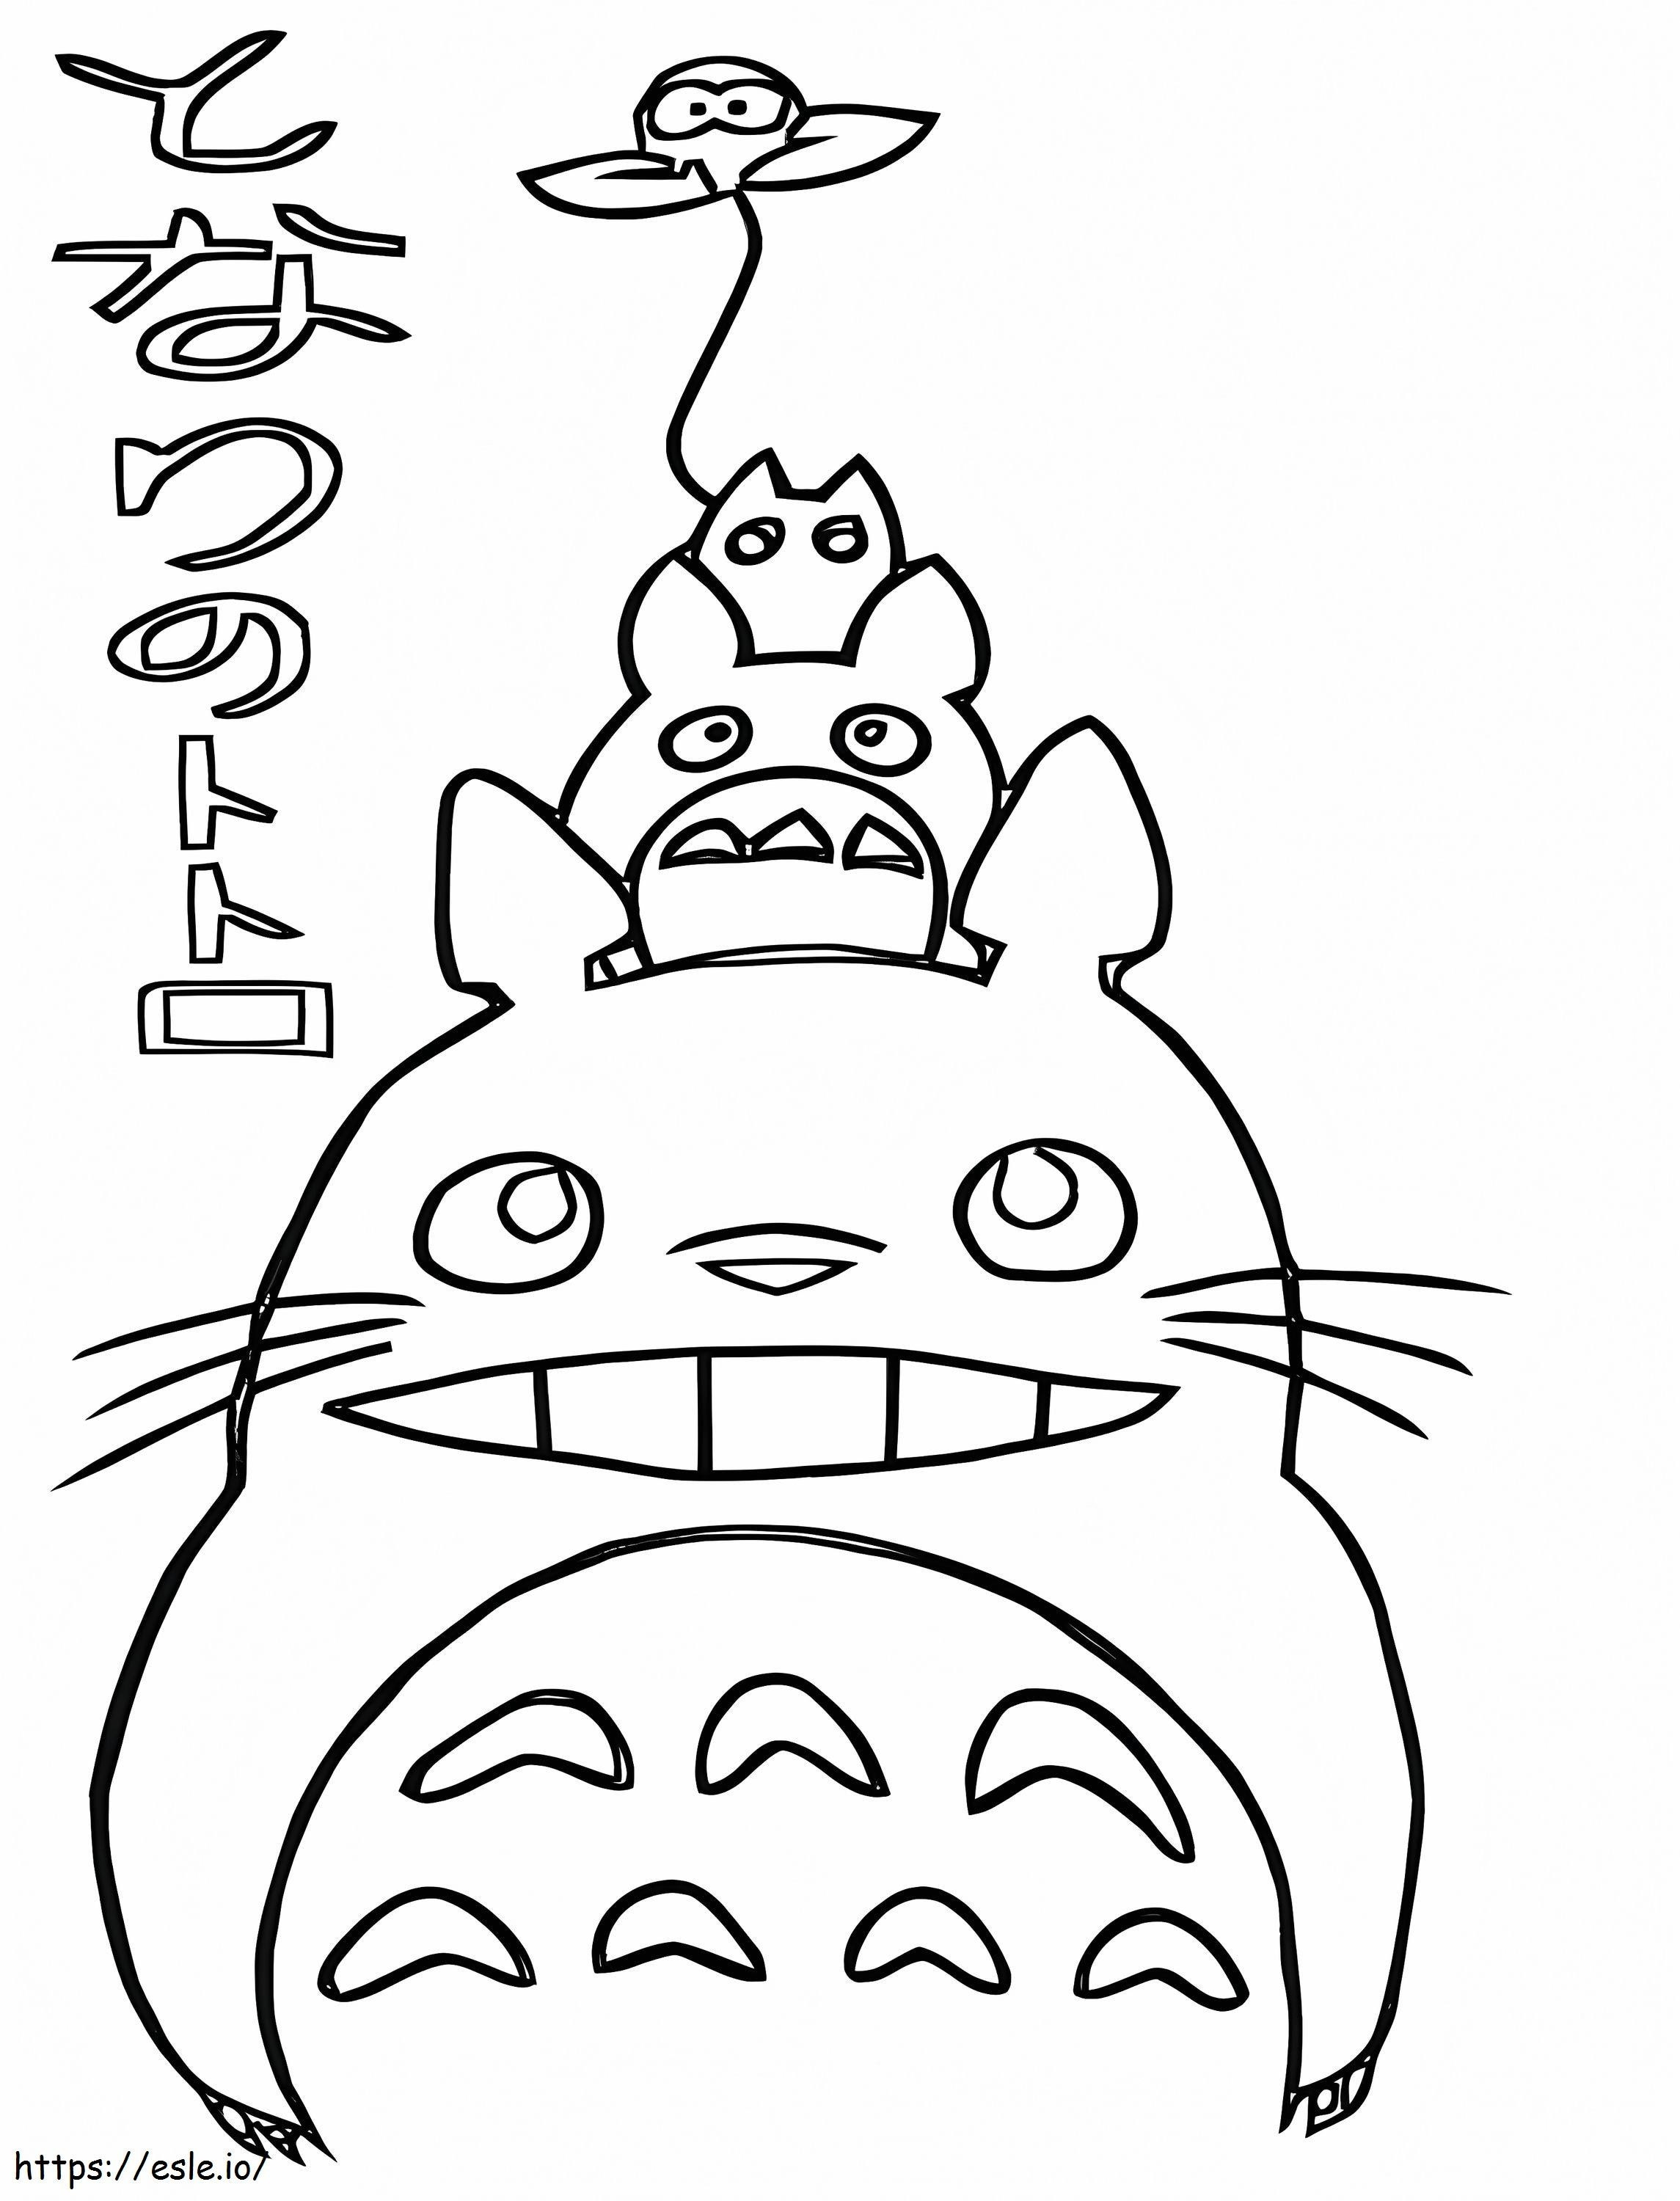 Friendly Totoro 5 coloring page